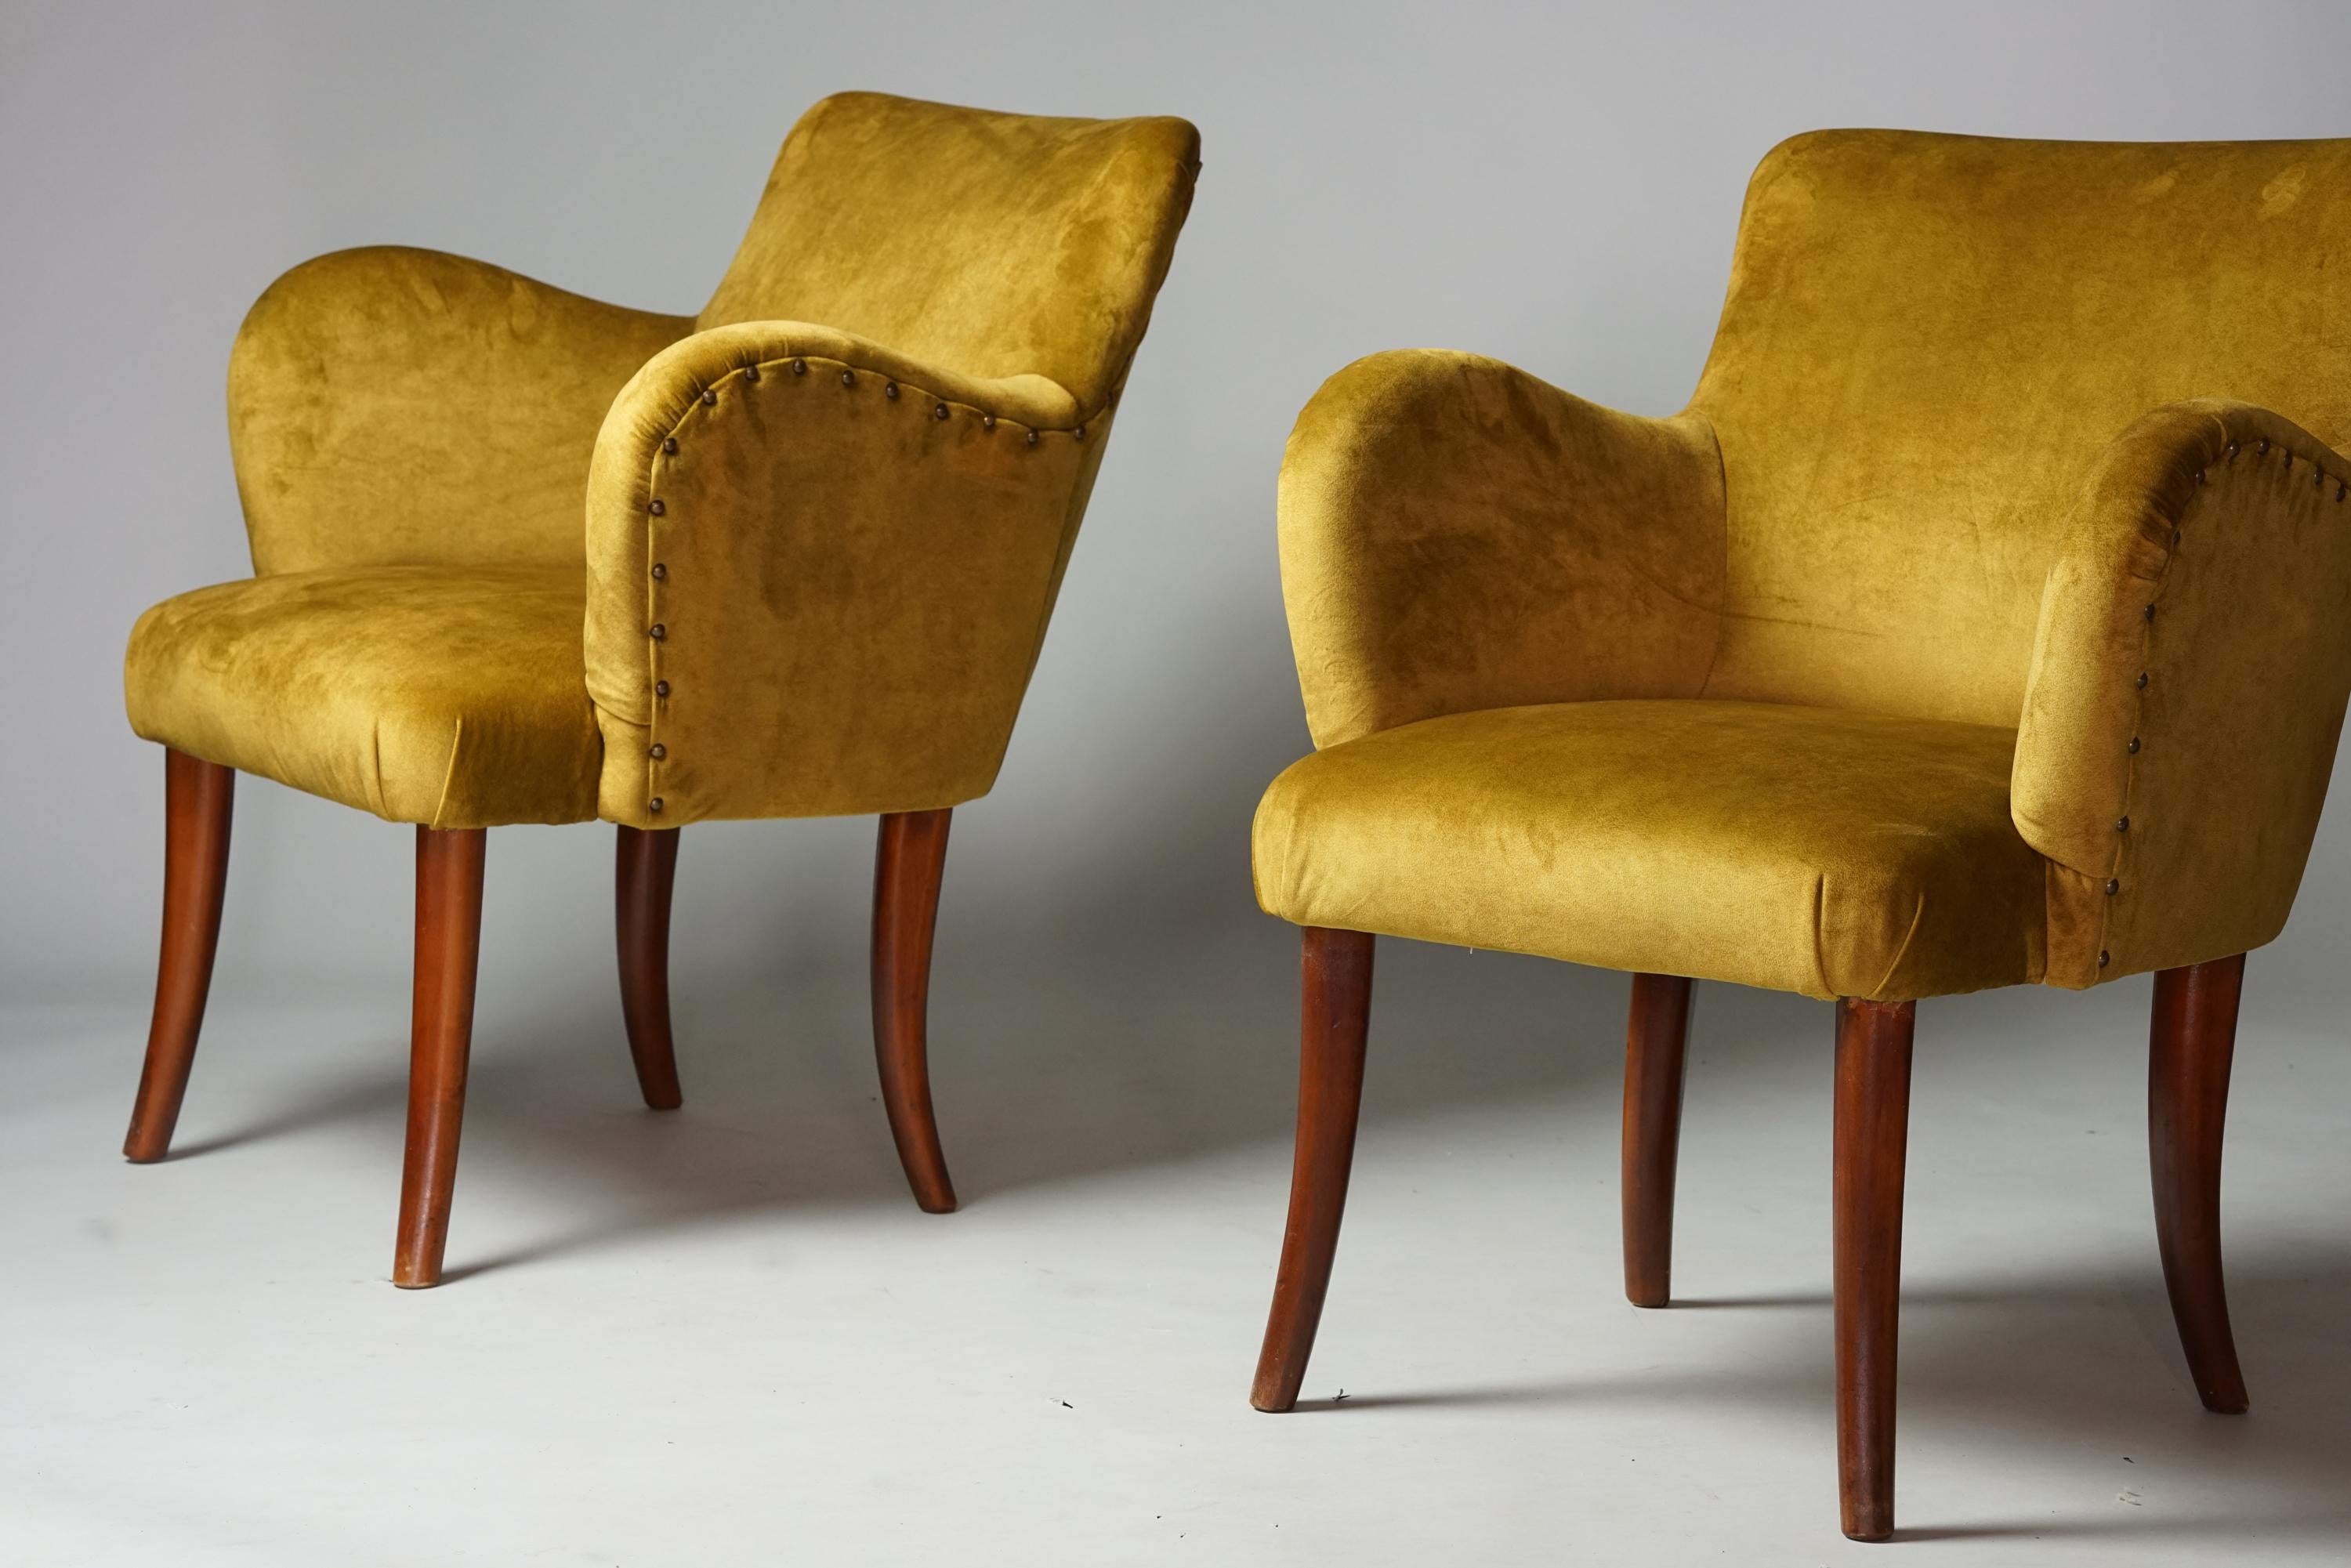 Armchairs in Gunnel Nyman Style, 1940s. Stained birch legs, reupholstered with quality velvet like -fabric. Metal details. Good vintage condition, minor patina consistent with age and use. The armchairs are sold as a set. 